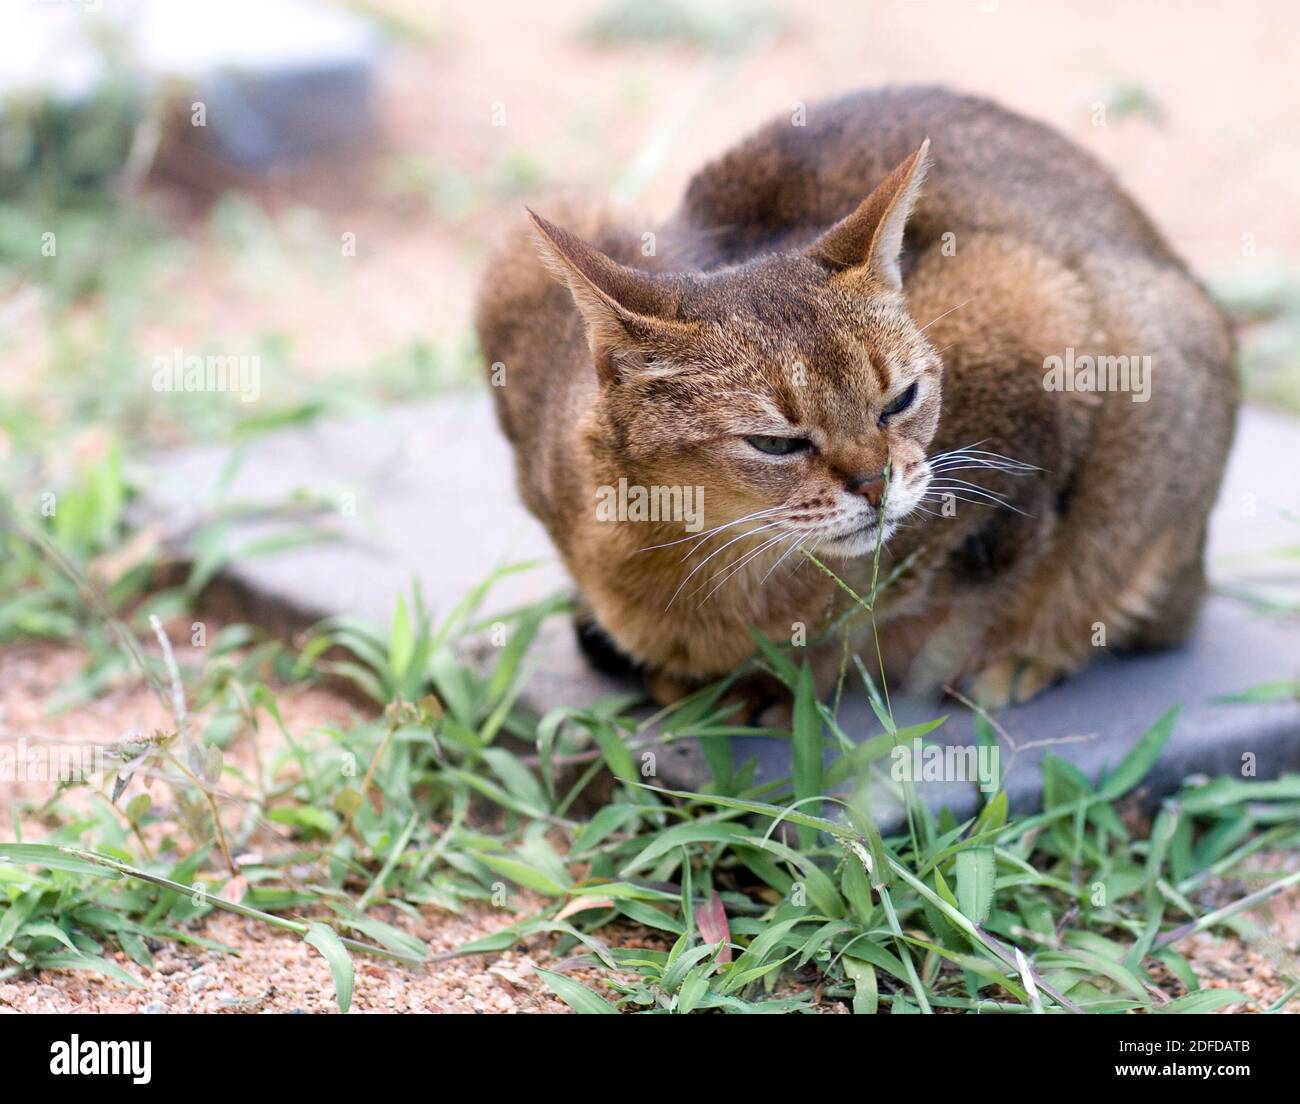 A beautiful Abyssinian cat sniffs at weeds in the garden Stock Photo